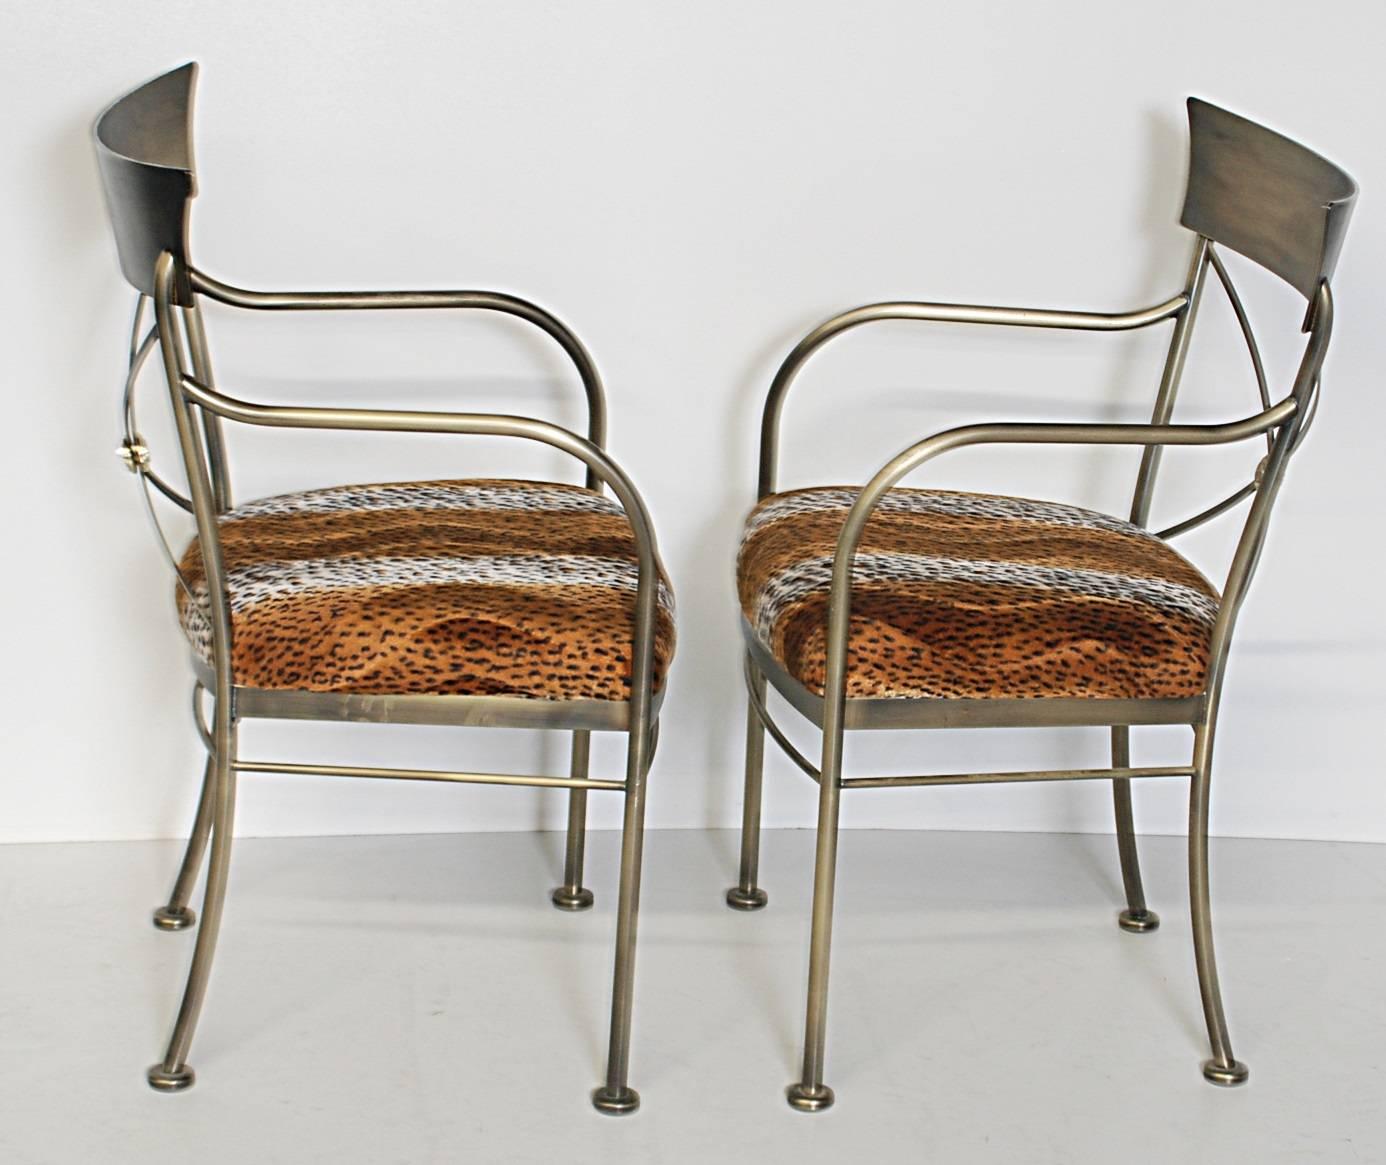 Pair of Directoire style brushed stainless steel side chairs with leopard design upholstery.